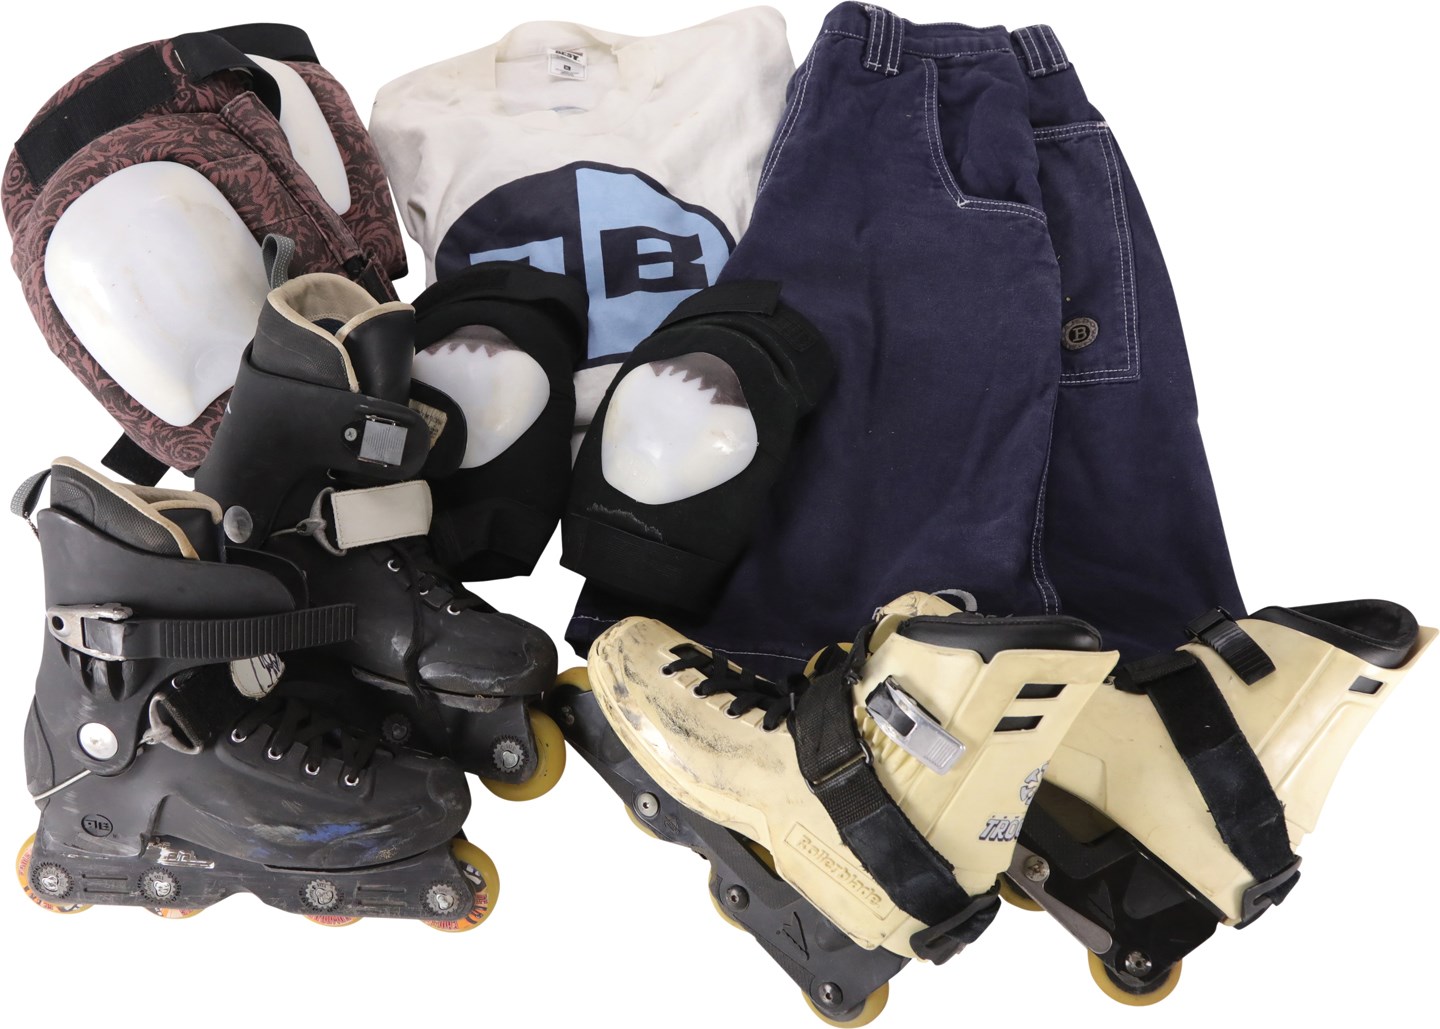 Olympics and All Sports - Chris Edwards Worn Rollerblades, Pads, and Outfit